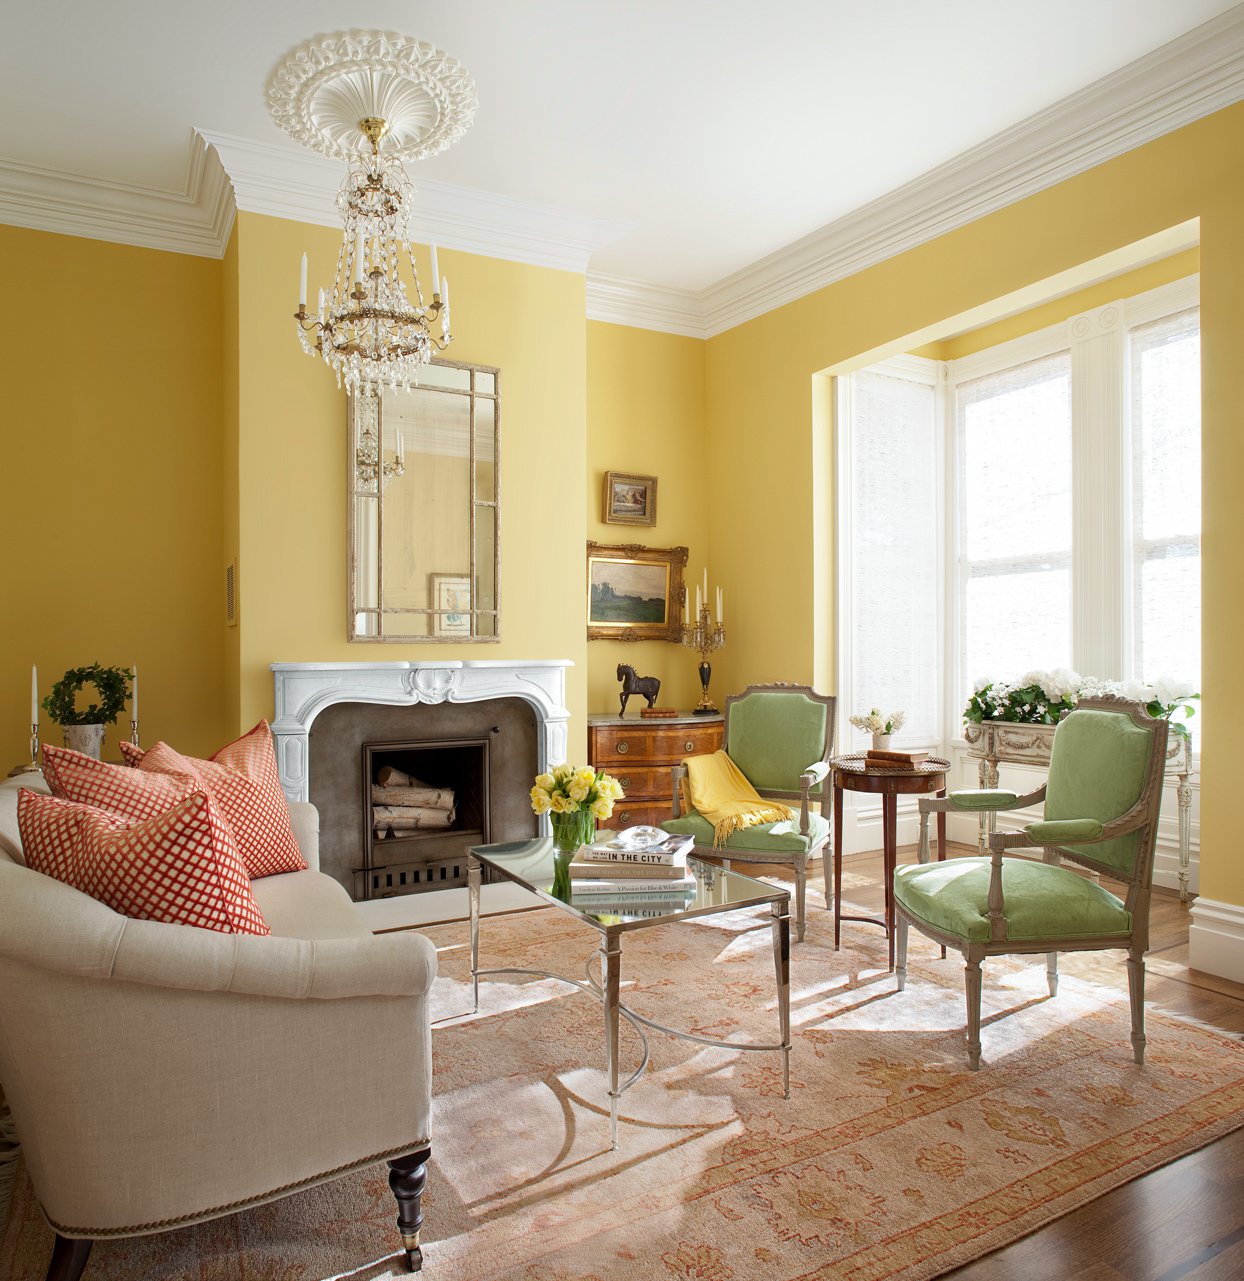 Create a Yellow Living Room with Gold Accents